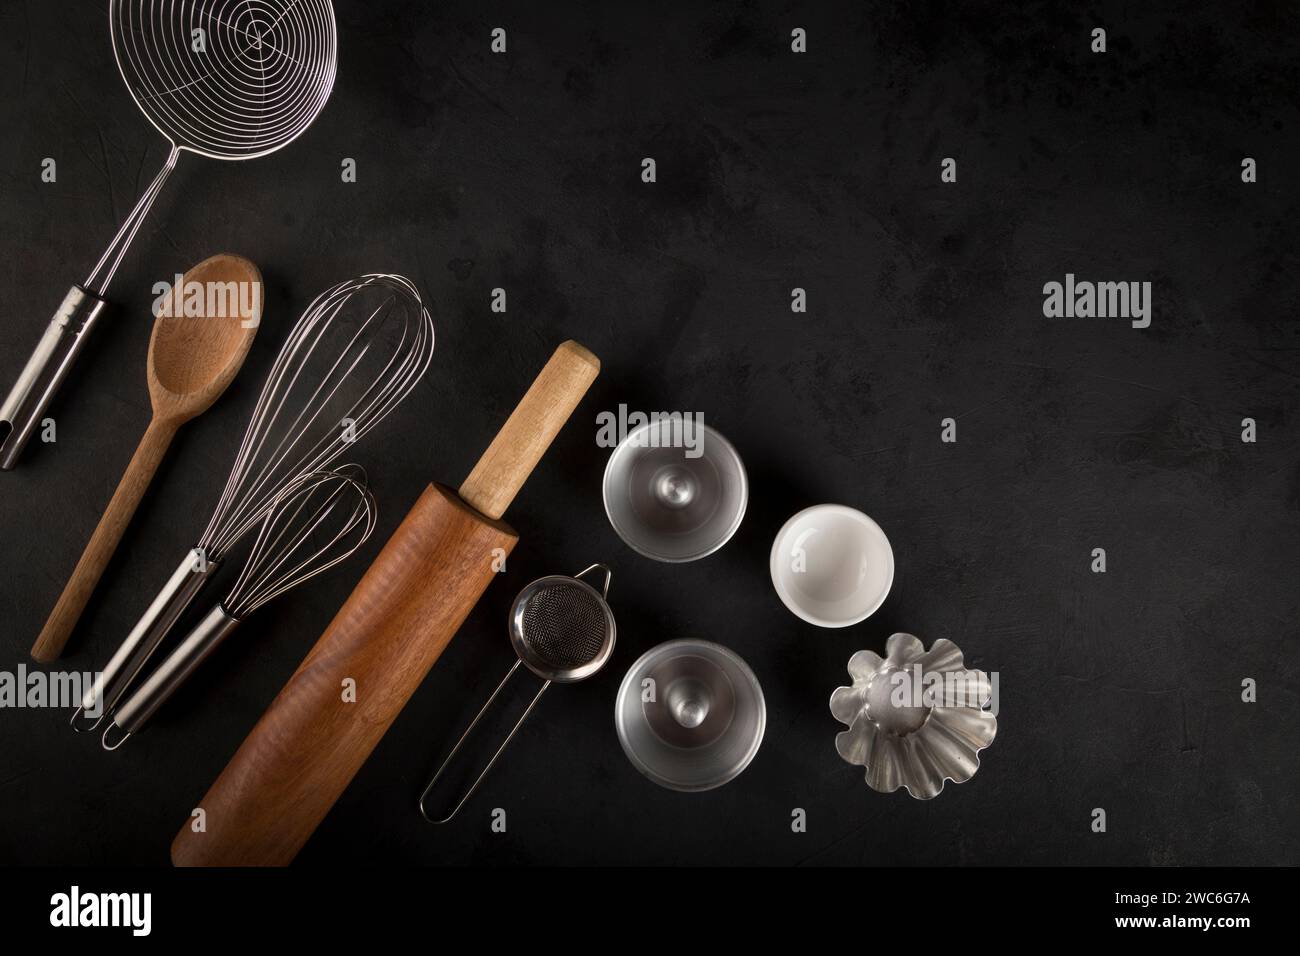 kitchen utensils on black background, seen from above. Stock Photo